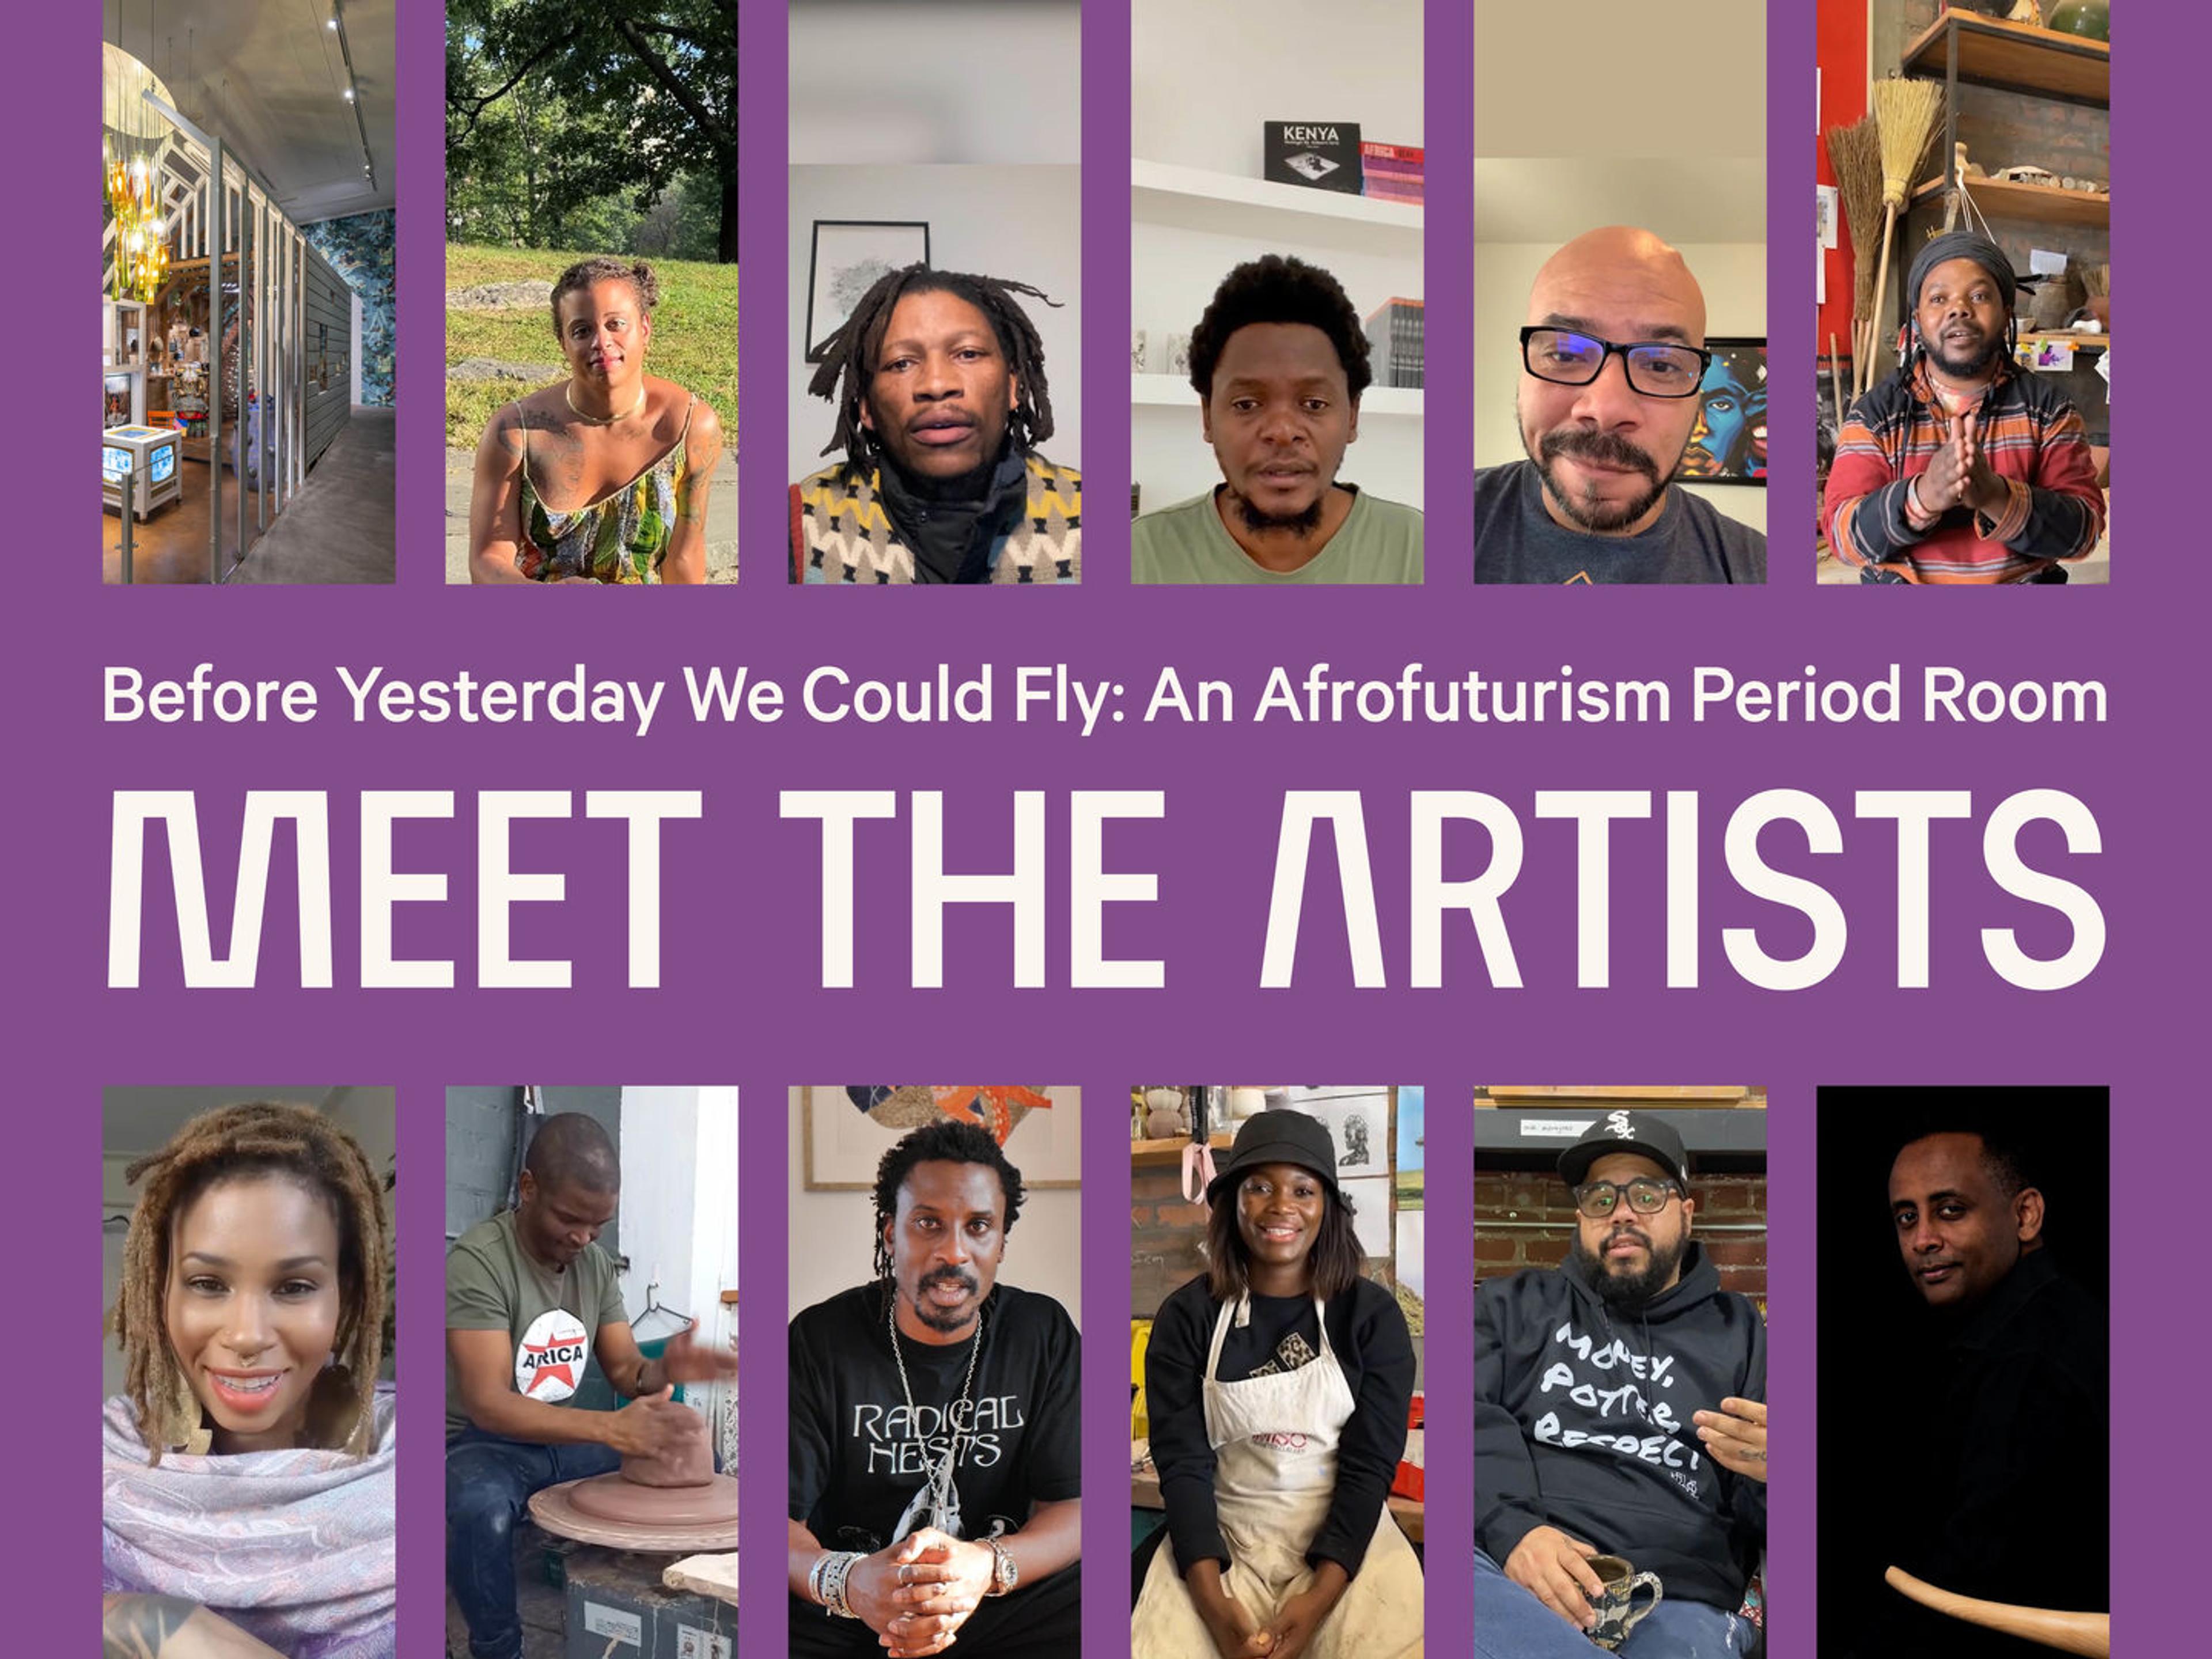 A collage of the diverse contemporary artists whose work is featured in Before Yesterday We Could Fly: An Afrofuturist Period Room.